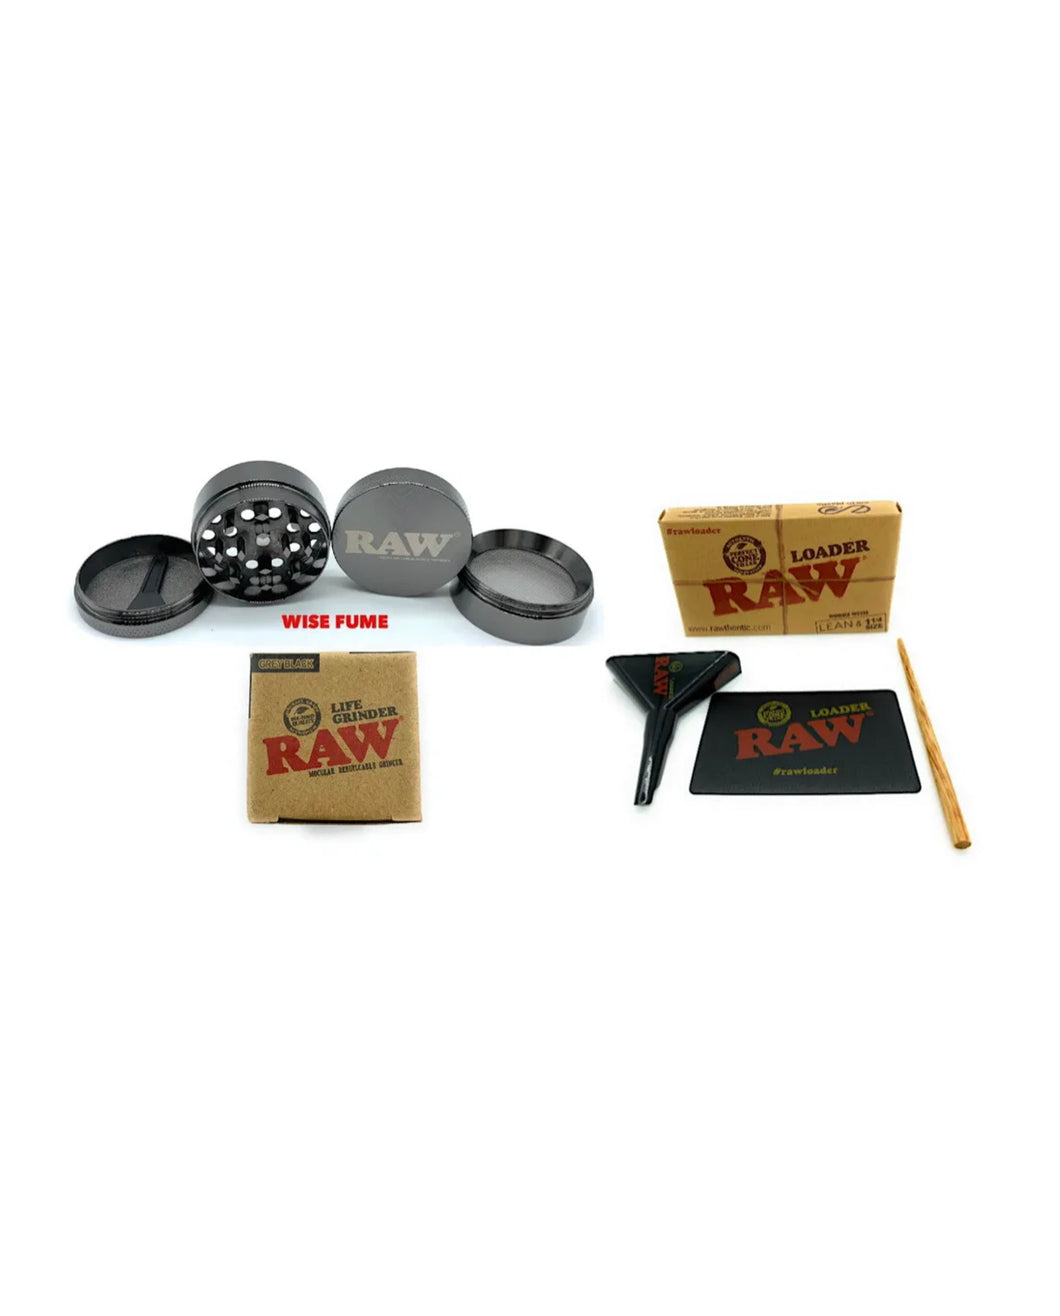 raw 1 1/4 lean size cone loader kit+ raw life grinder small size 4 pieces